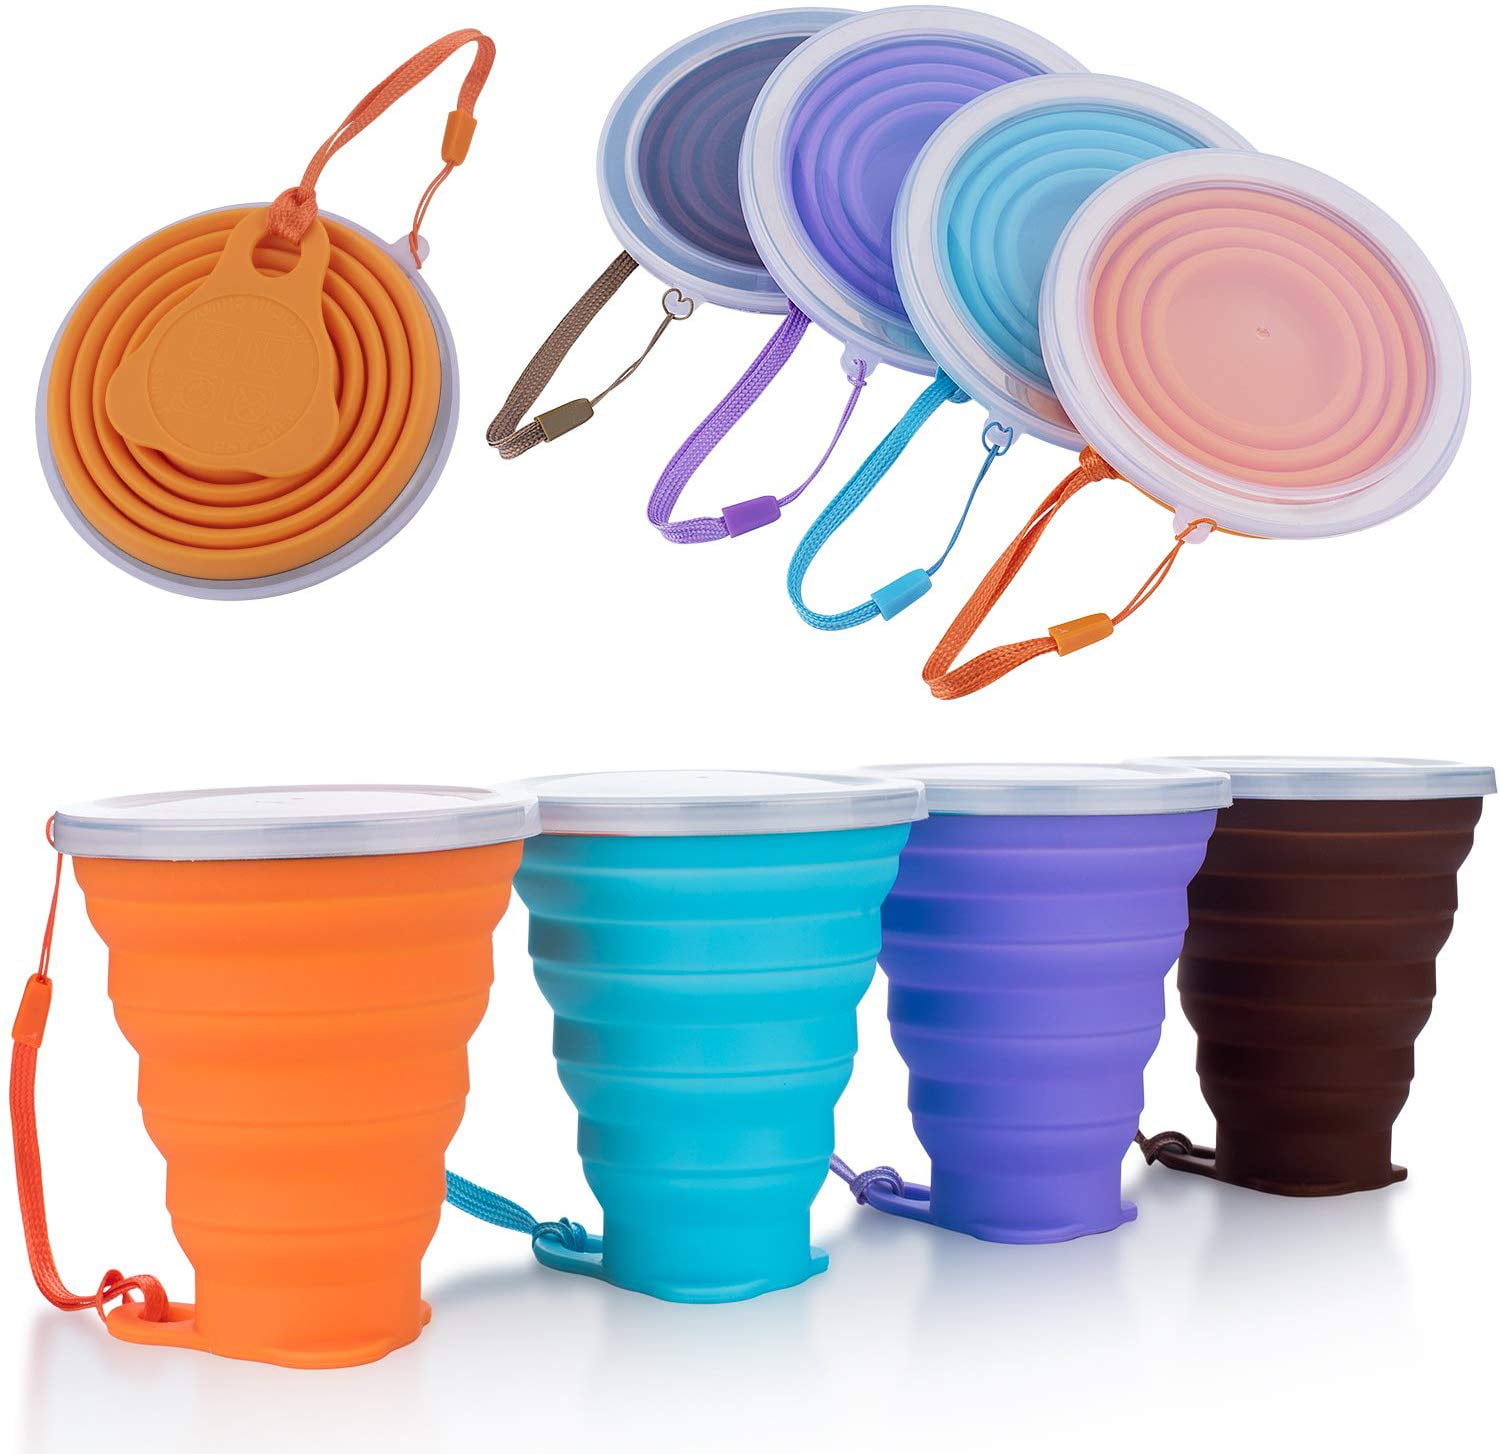 Details about   Collapsible Cup Silicone Folding Mug Portable Travel Cup with Straw 12oz 